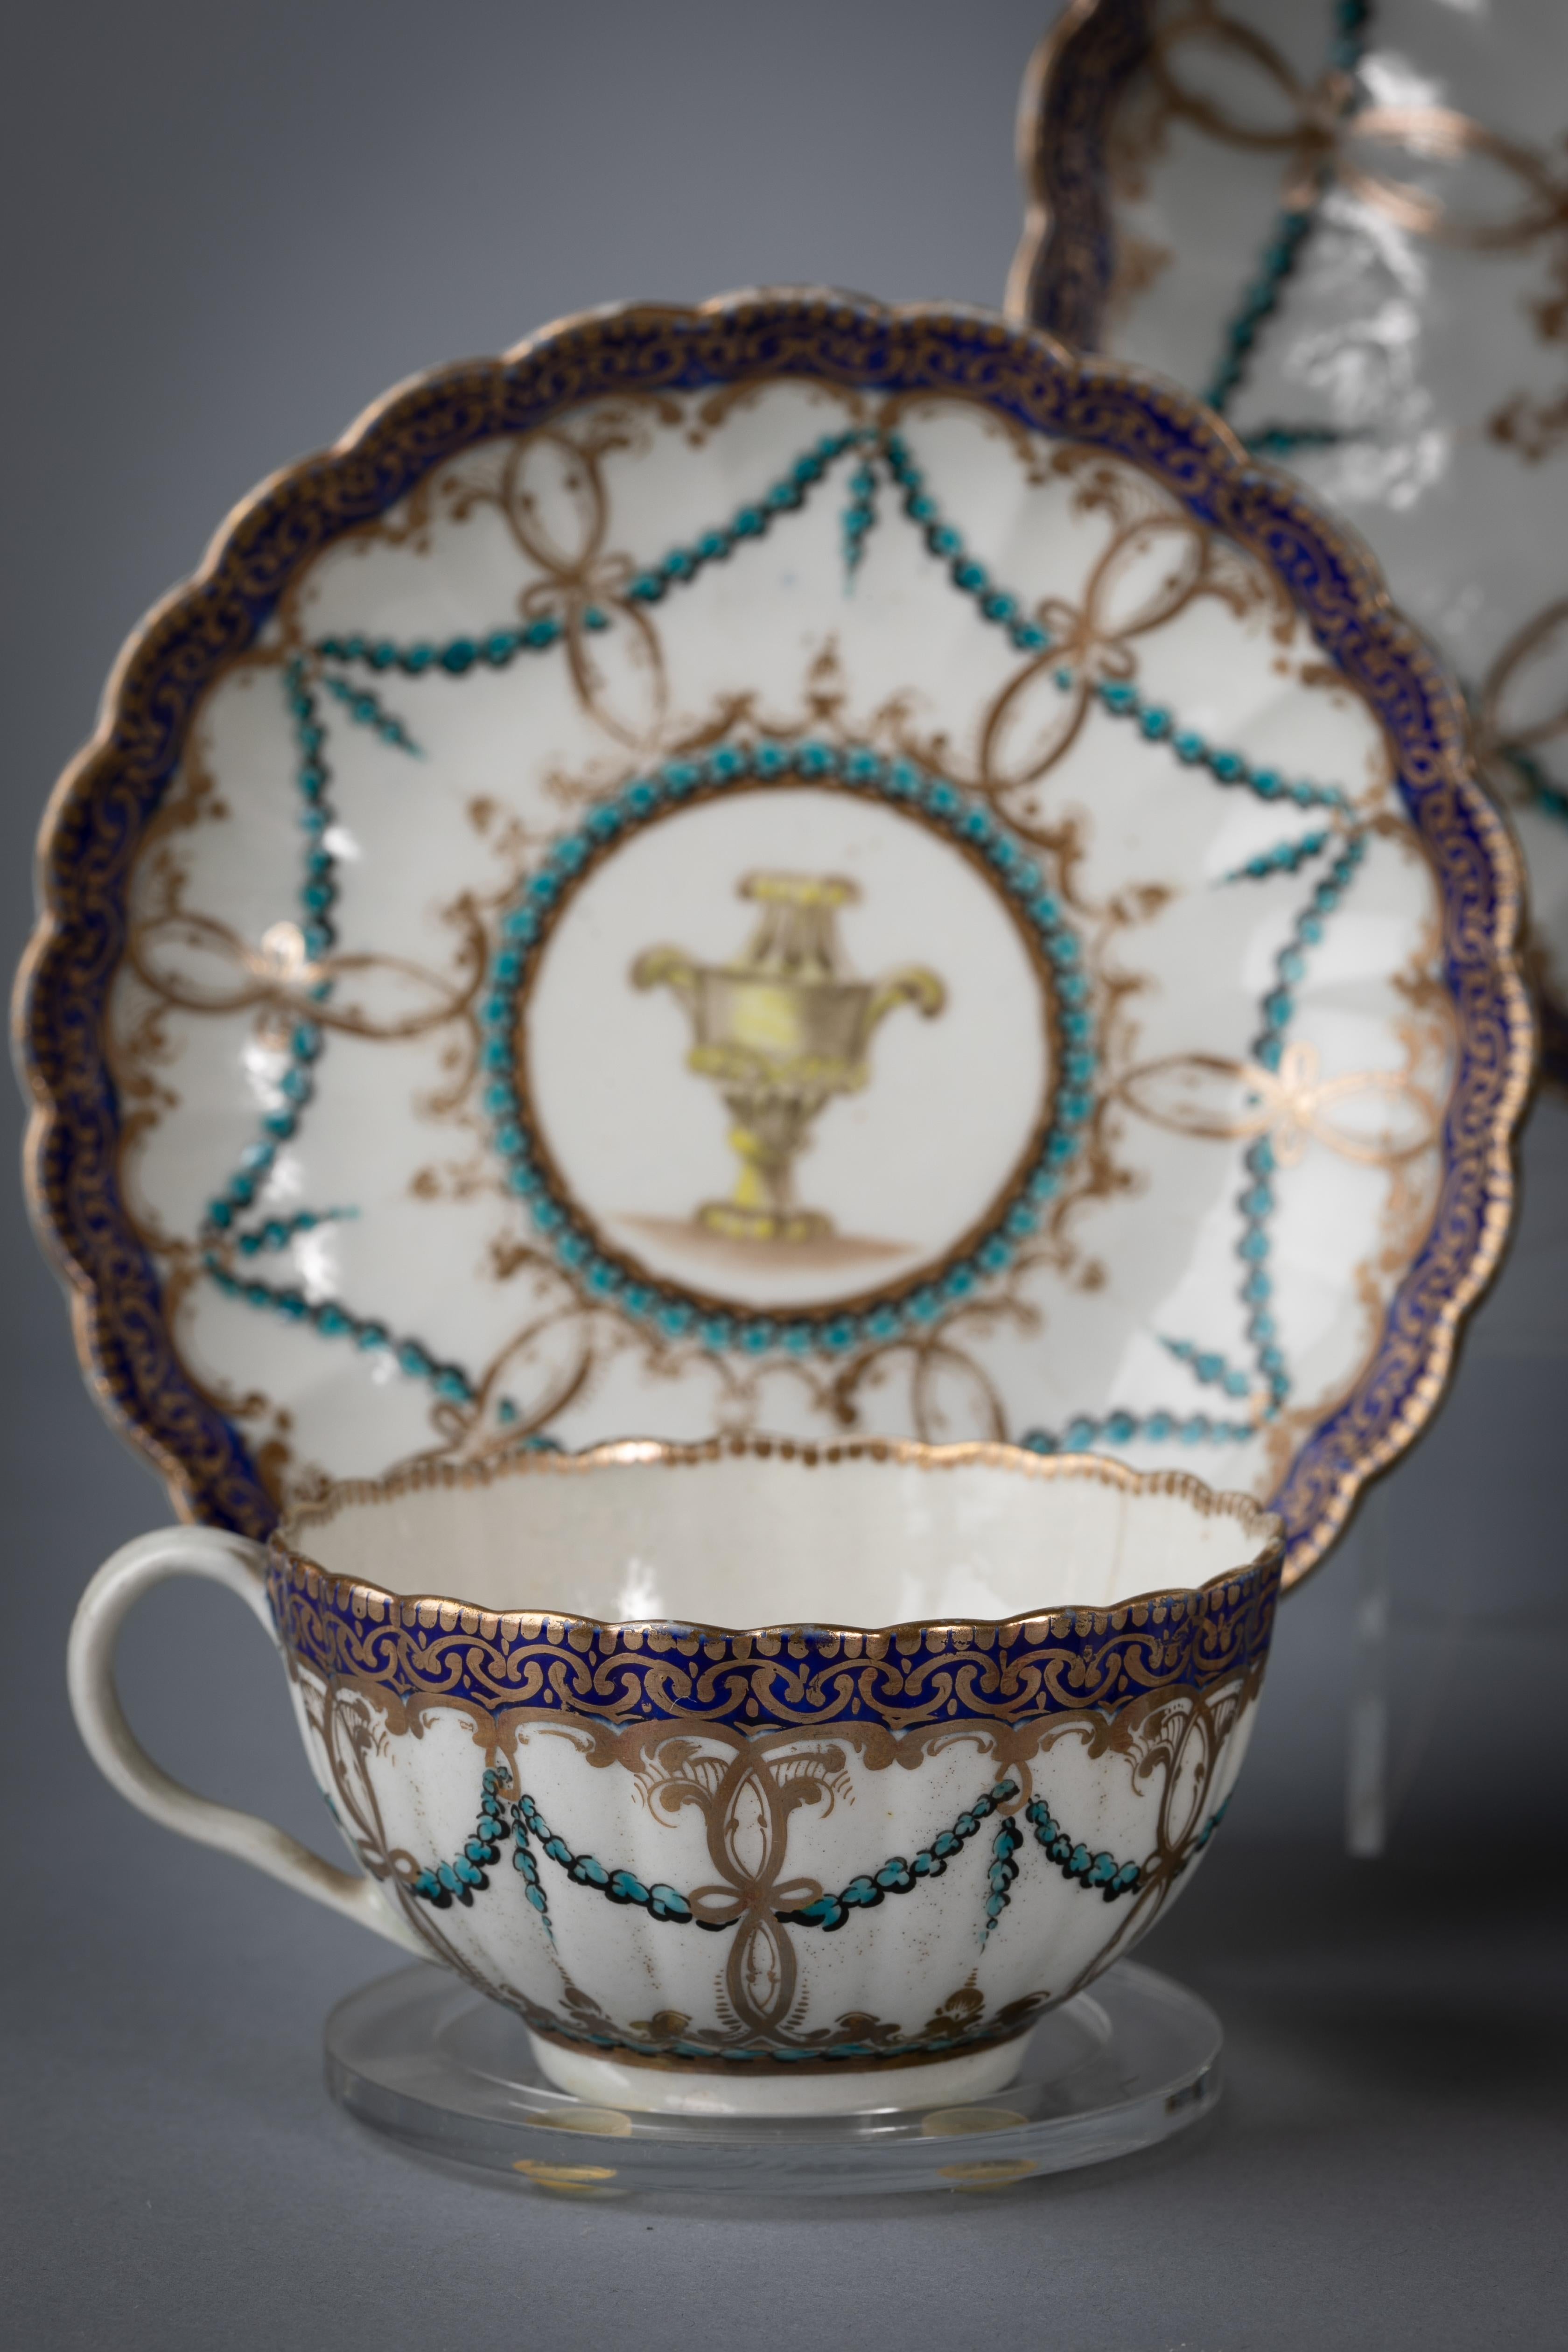 Delicately enameled with turquoise garlands draped through hanging gilt rings beneath a royal blue and gilt border. Each piece with a neoclassical vase painted in grisaille and light yellow. Comprising a bowl, creamer, covered sugar, tea stand, pair